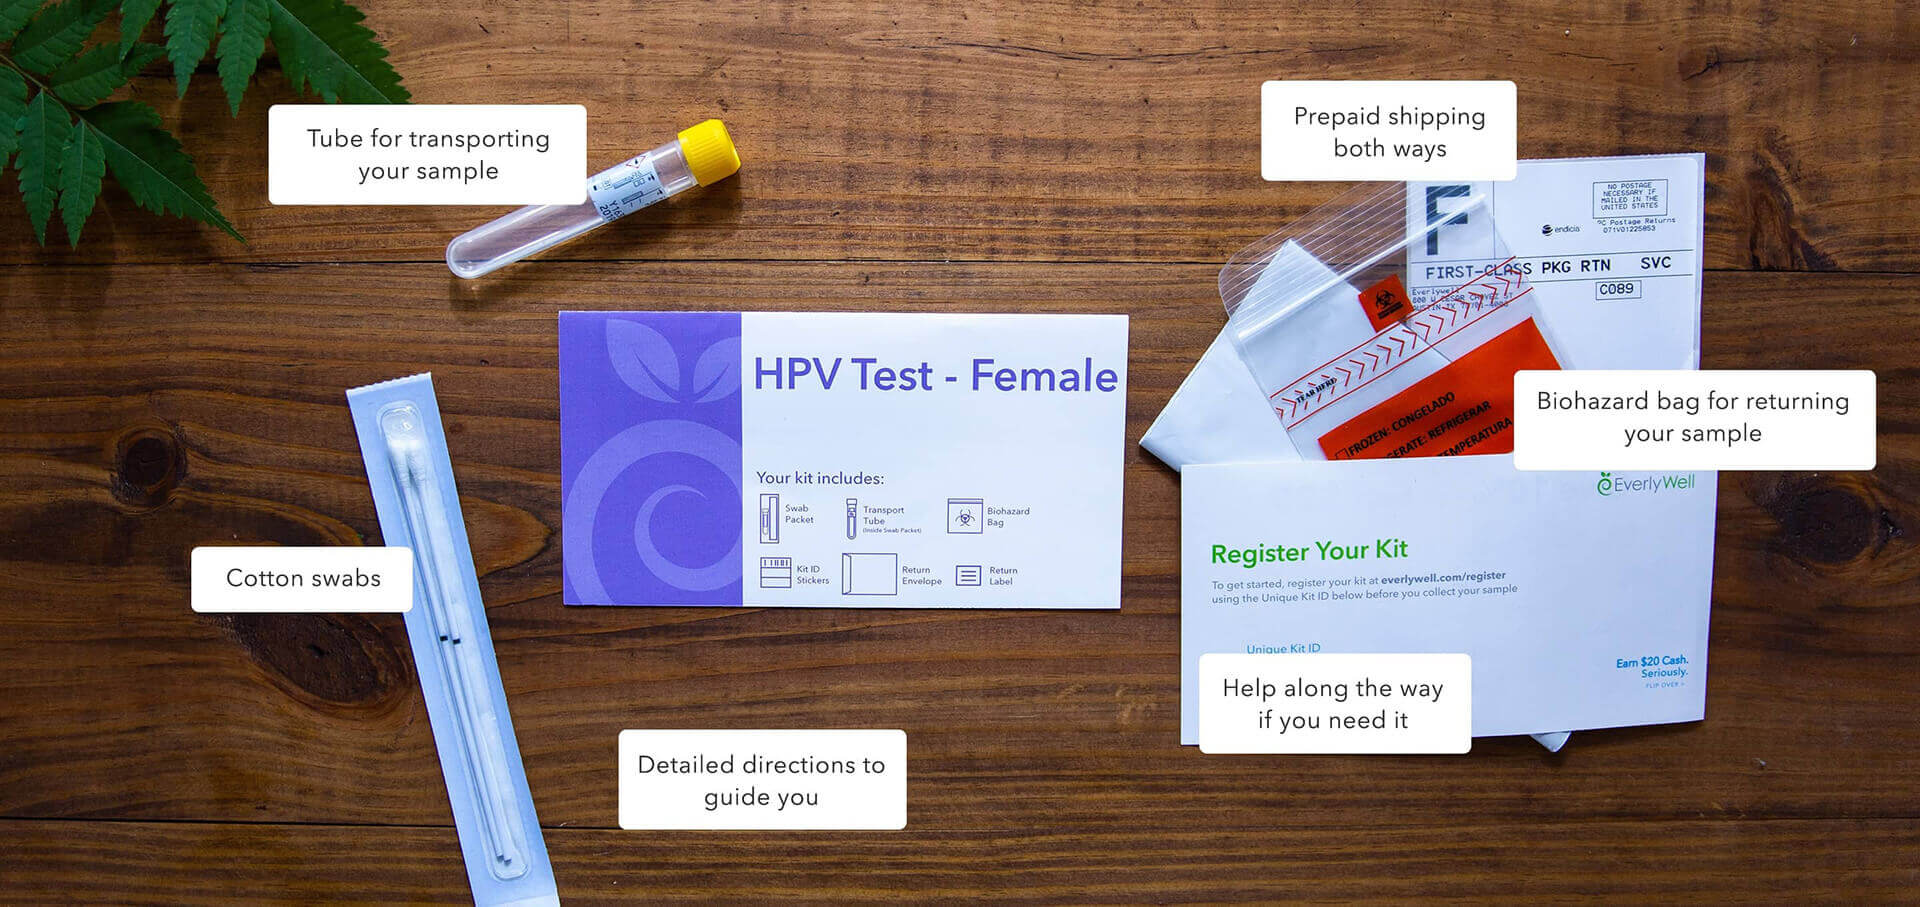 At Home High Risk Hpv Test Costs Less Than A Doctor’s Visit Everlywell